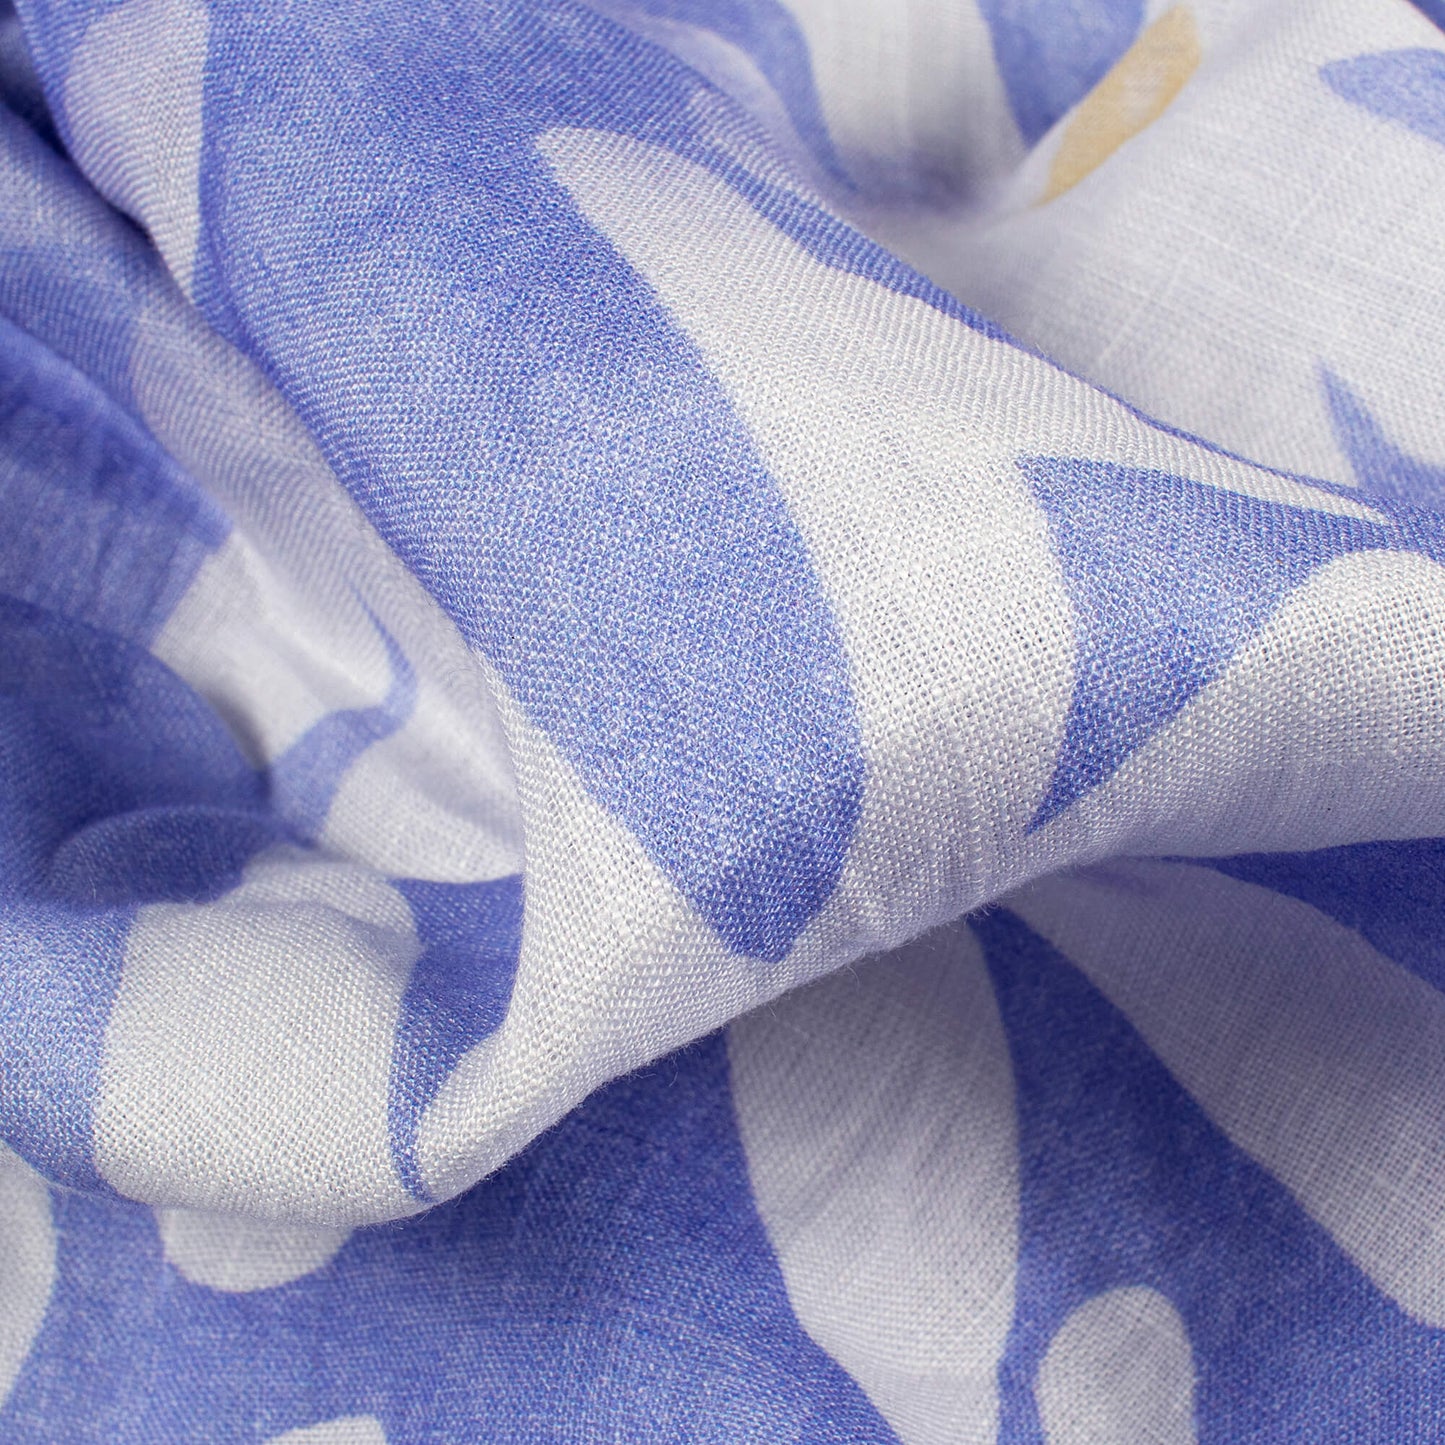 Periwinkle Purple And White Floral Digital Print Swiss Linen Fabric